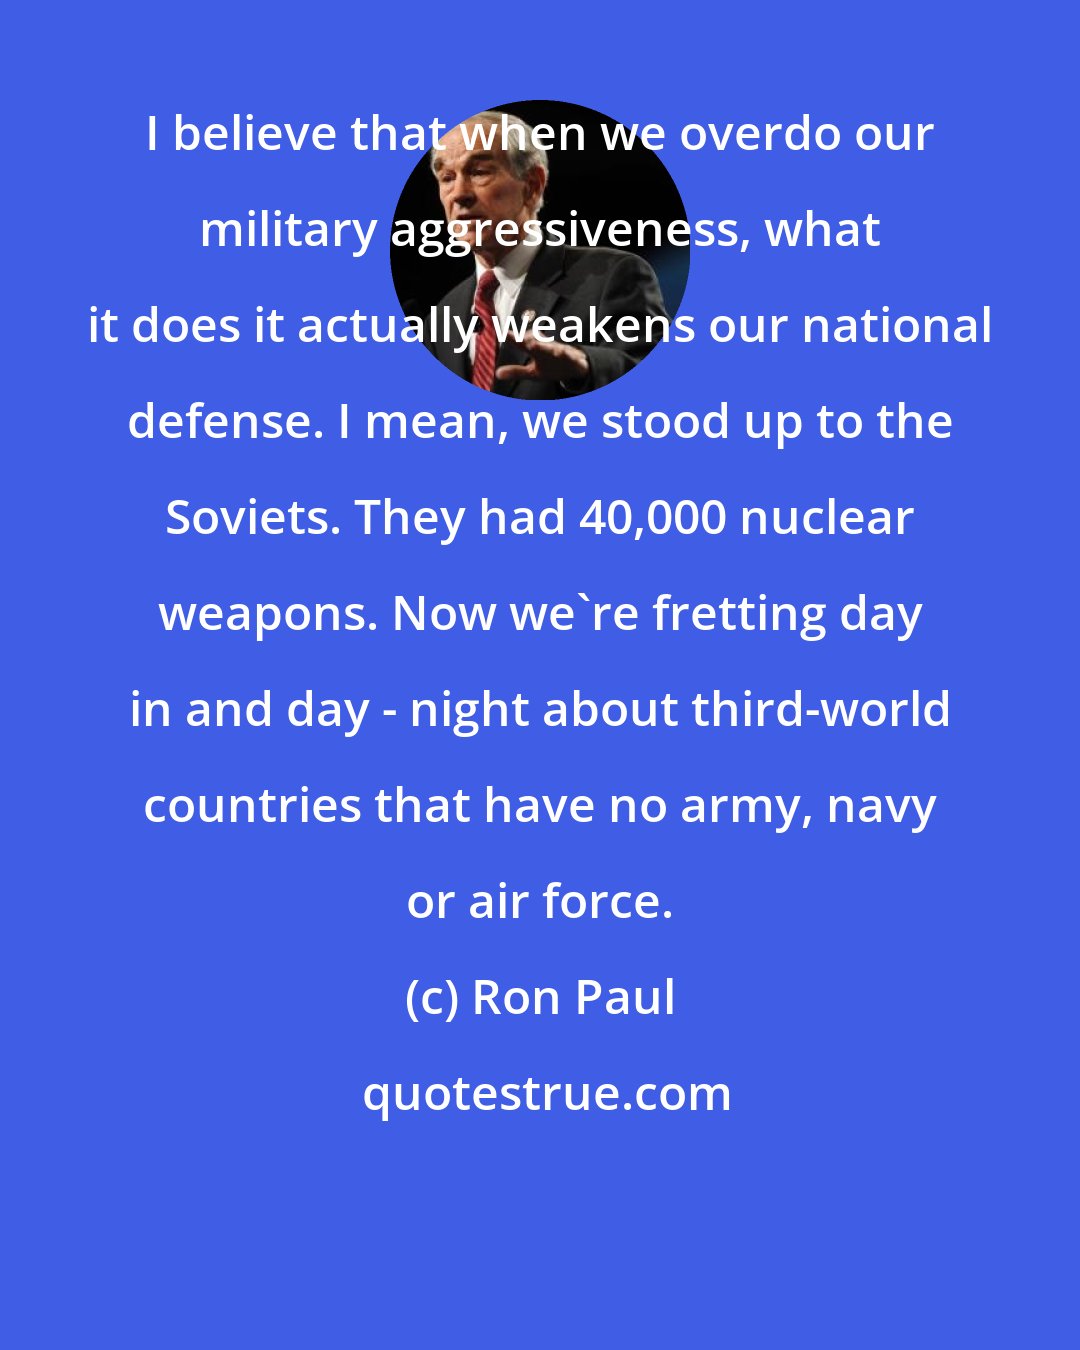 Ron Paul: I believe that when we overdo our military aggressiveness, what it does it actually weakens our national defense. I mean, we stood up to the Soviets. They had 40,000 nuclear weapons. Now we're fretting day in and day - night about third-world countries that have no army, navy or air force.